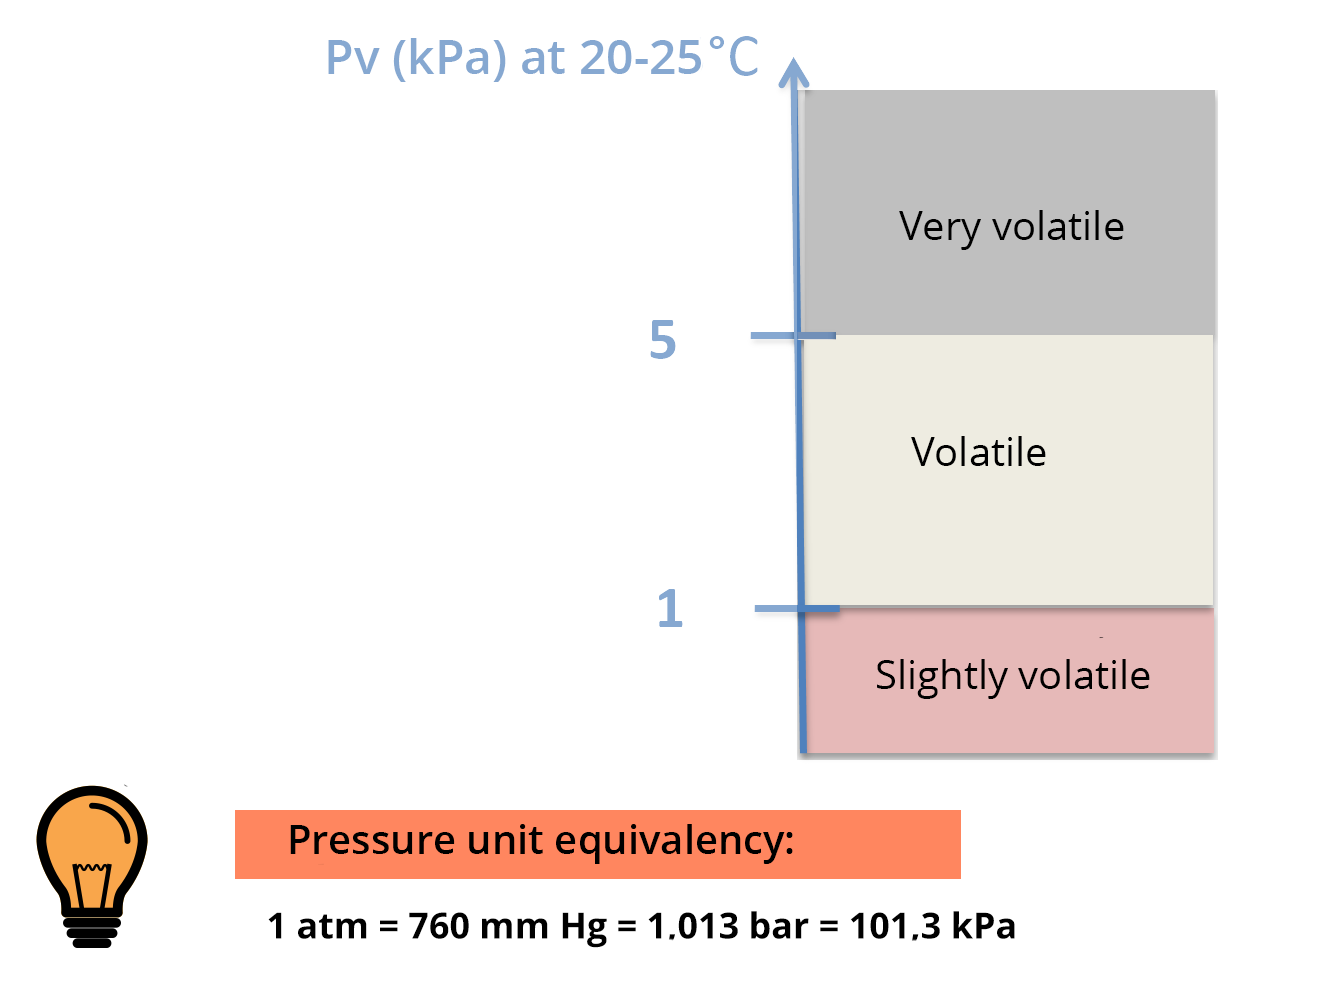 Scale of Pv (kPa) at 20-25°C. Below 1 : Low volatility. From 1 to 5 : Volatile. Above 5 : Very volatile. Equivalence of pressure units: 1 atm = 760 mm Hg = 1.013 bar = 101.3 kPa